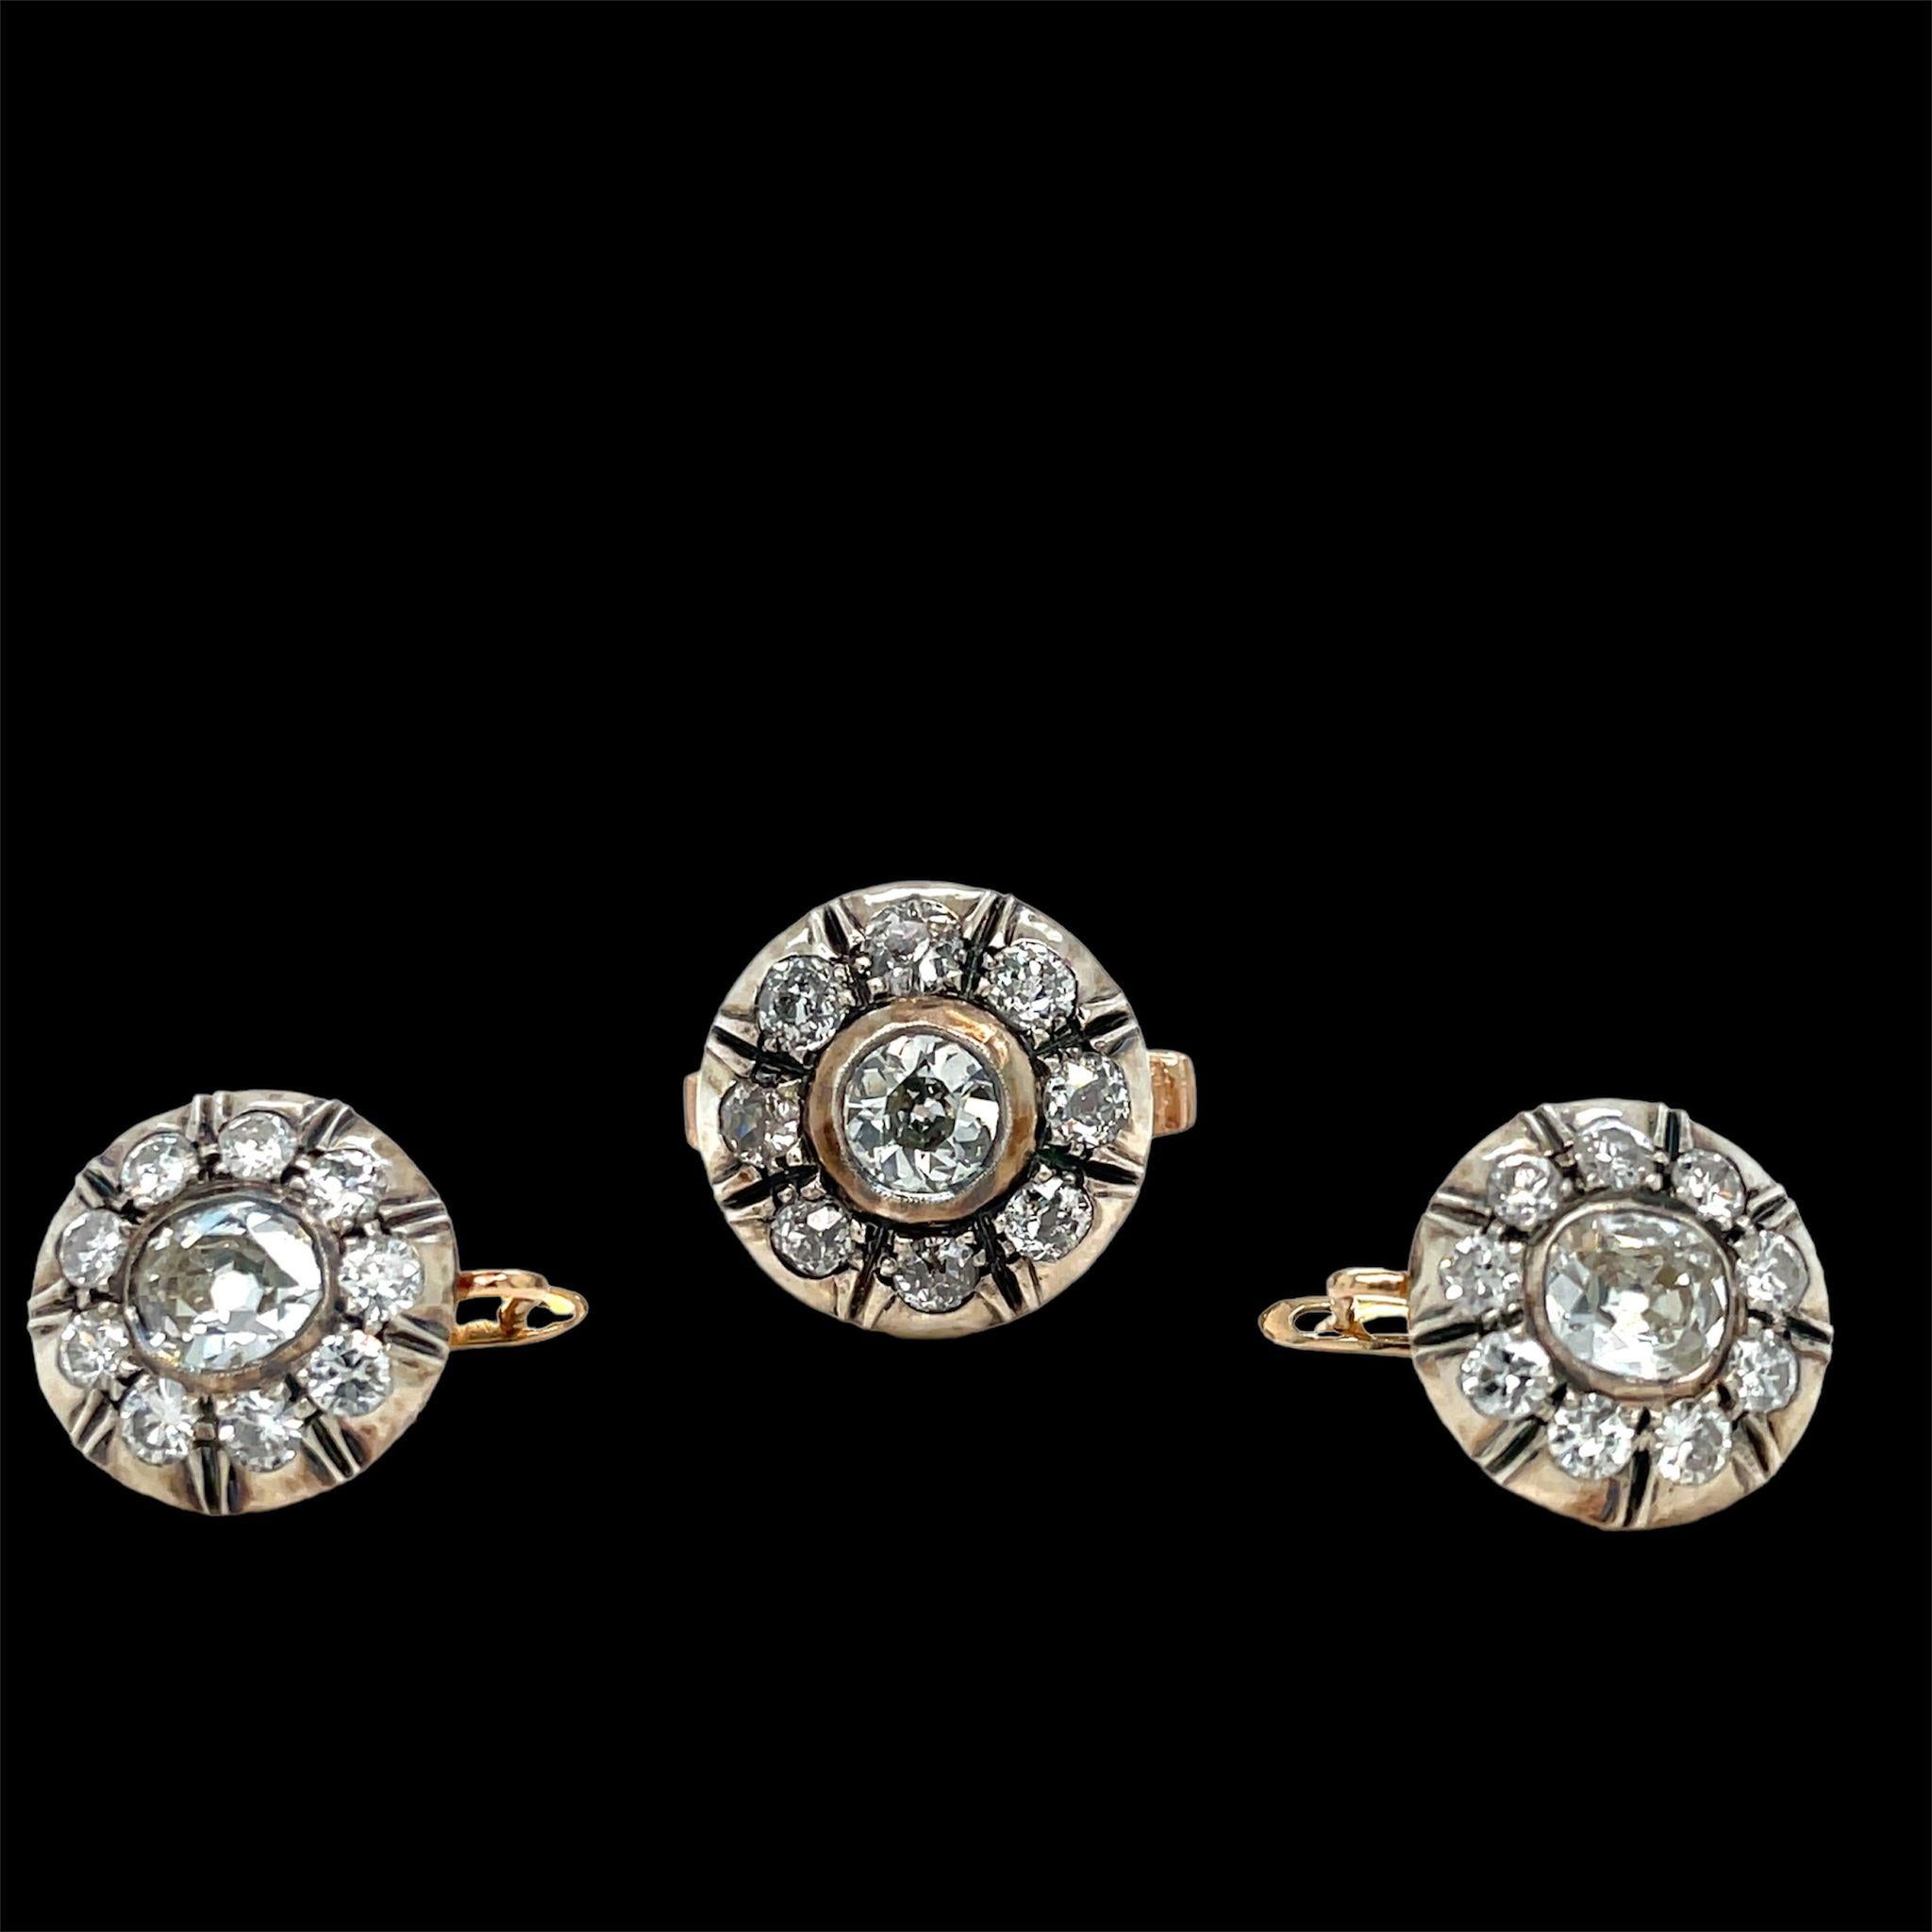 A gorgeous Victorian perfectly preserved suite, composed of clip-on earrings and ring, set with Old Mine cut diamonds, mounted in 18k rose Gold and silver. On the ring we estimated approximately 2 ct of diamonds (the central gem is approximately